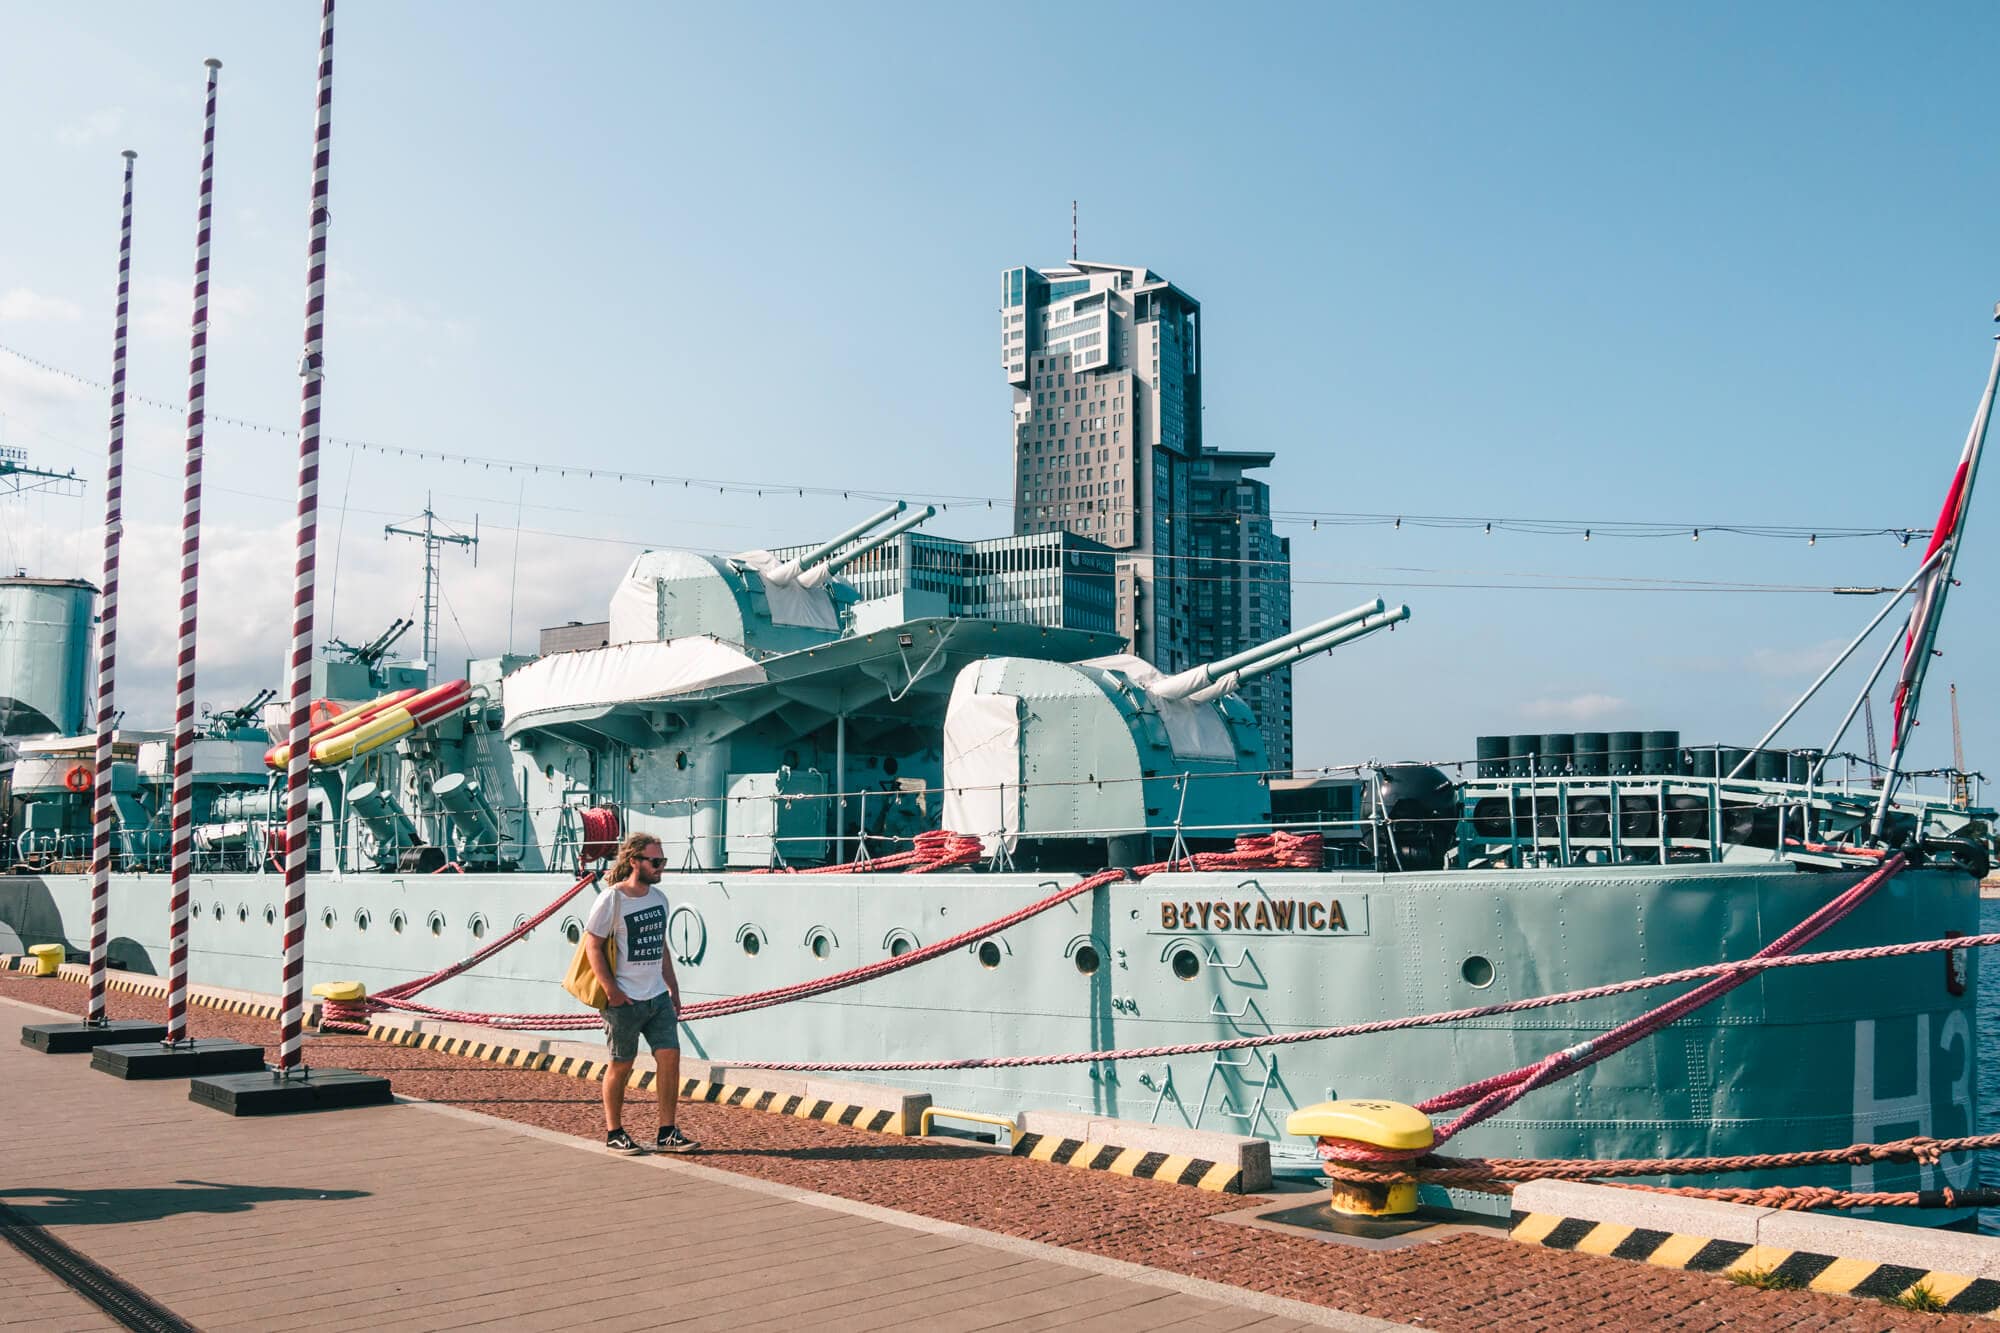 Military ship in Gdynia Harbor, the perfect day trip from Gdansk.